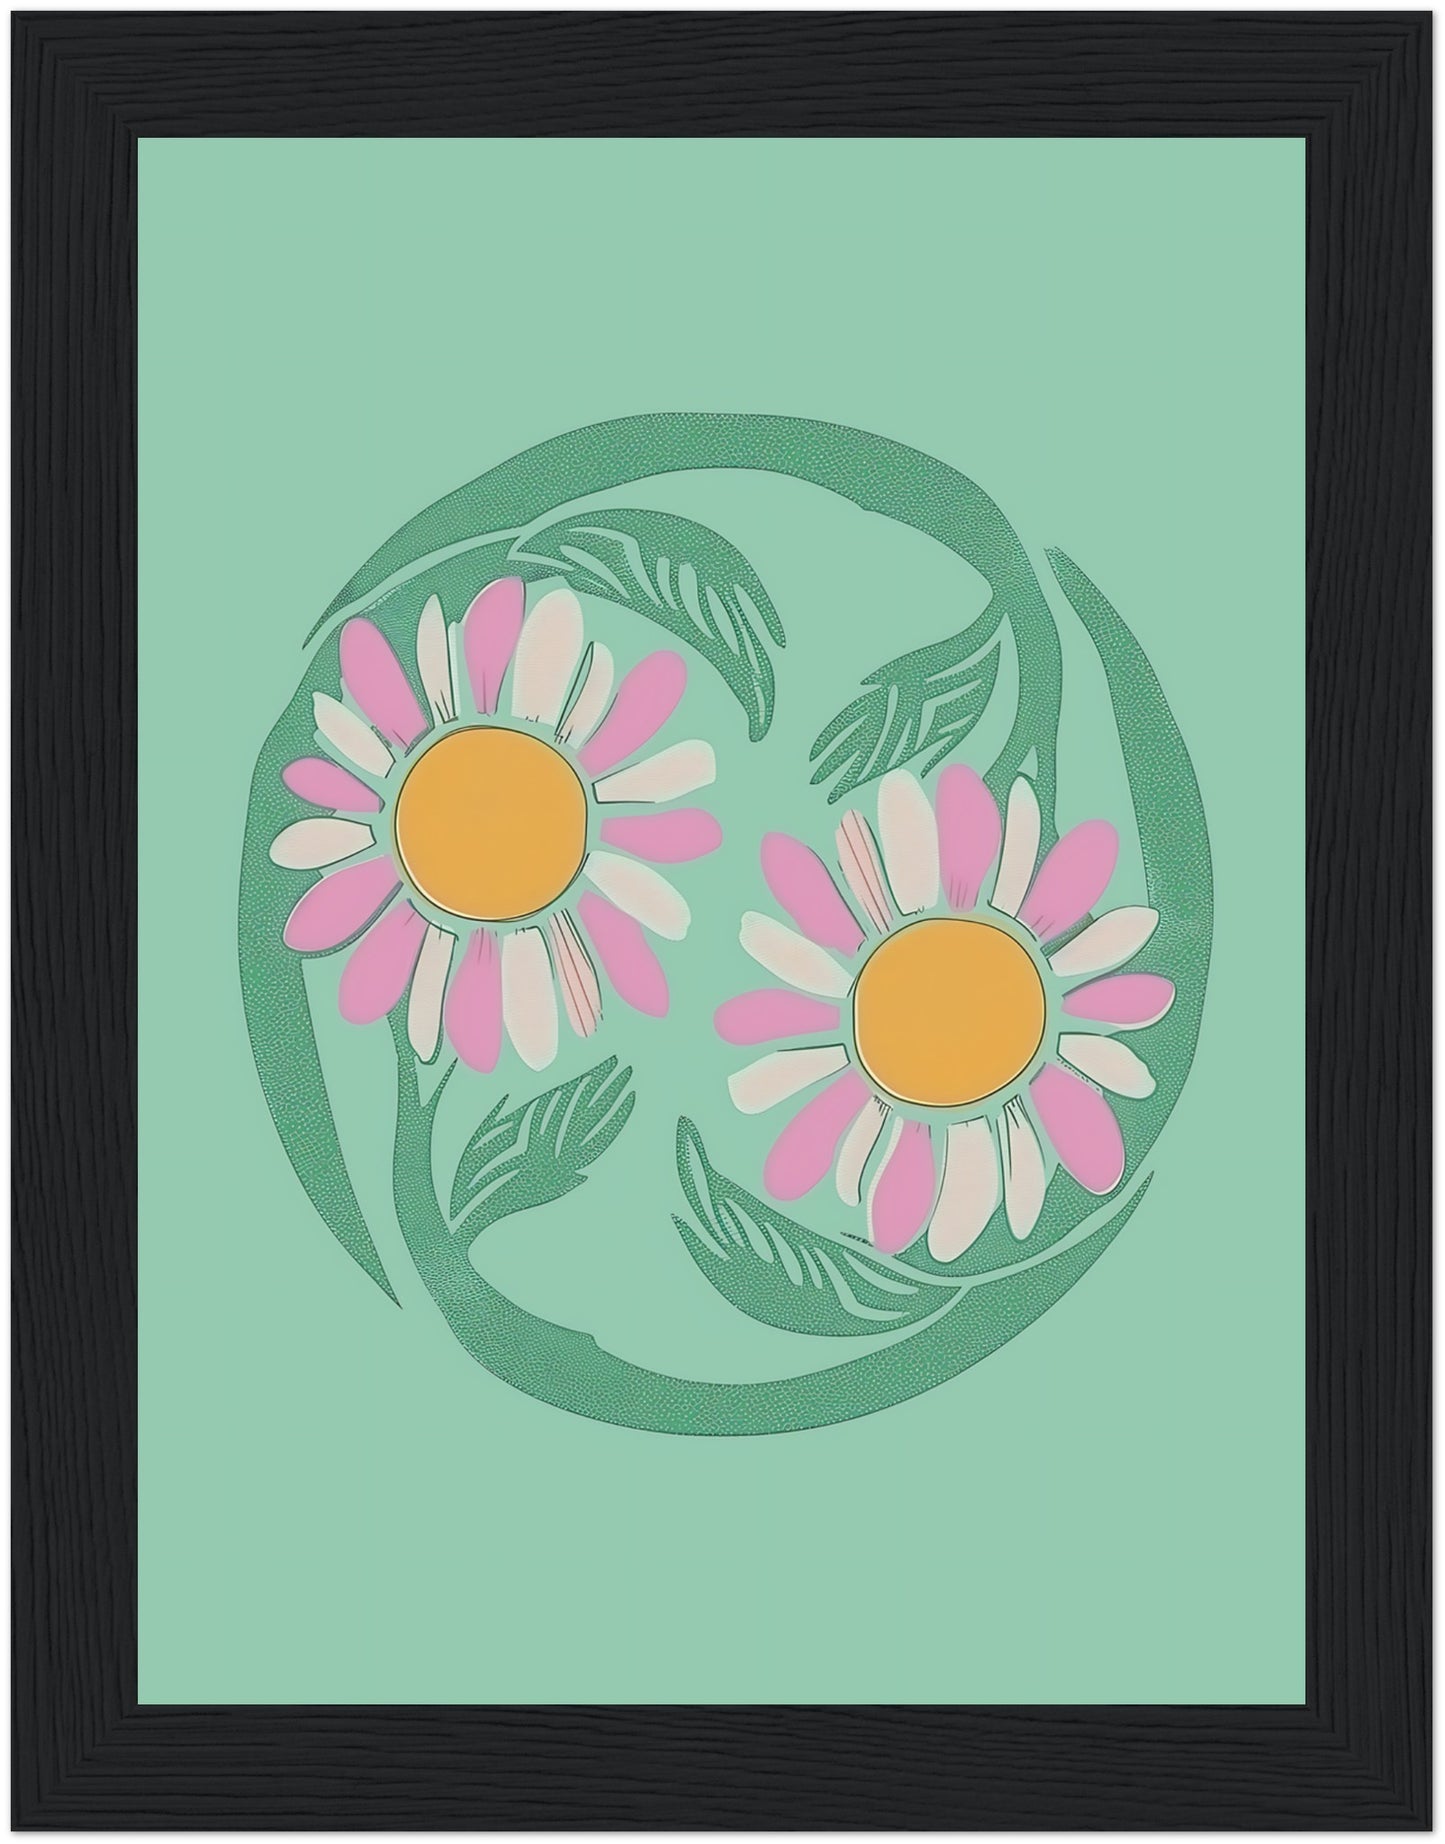 Stylized illustration of two daisies encircled by a green vine on a teal background with a brown frame.